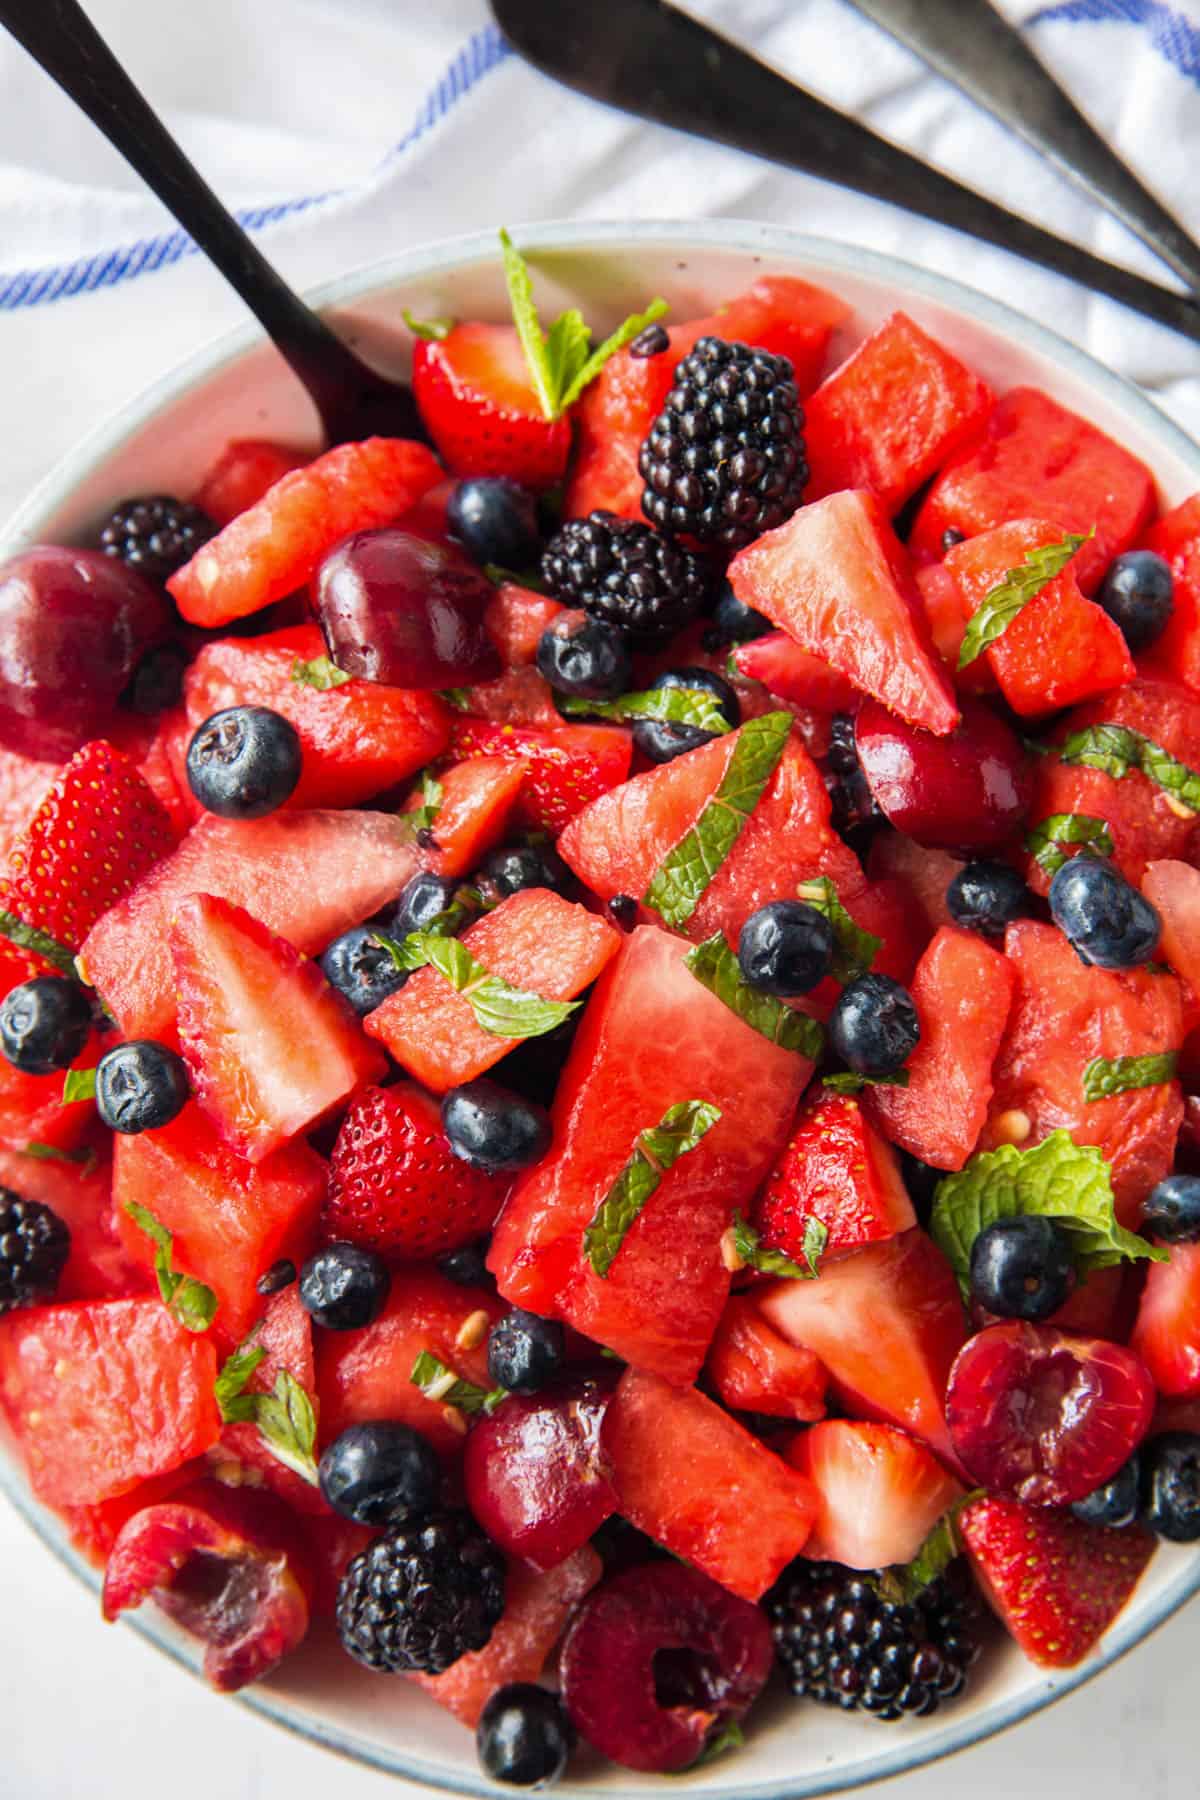 A large white serving bowl filled with watermelon, strawberries, blueberries, blackberries and cherries with a simple honey lemon dressing and mint. A large serving spoon rests in the bowl with the salad.